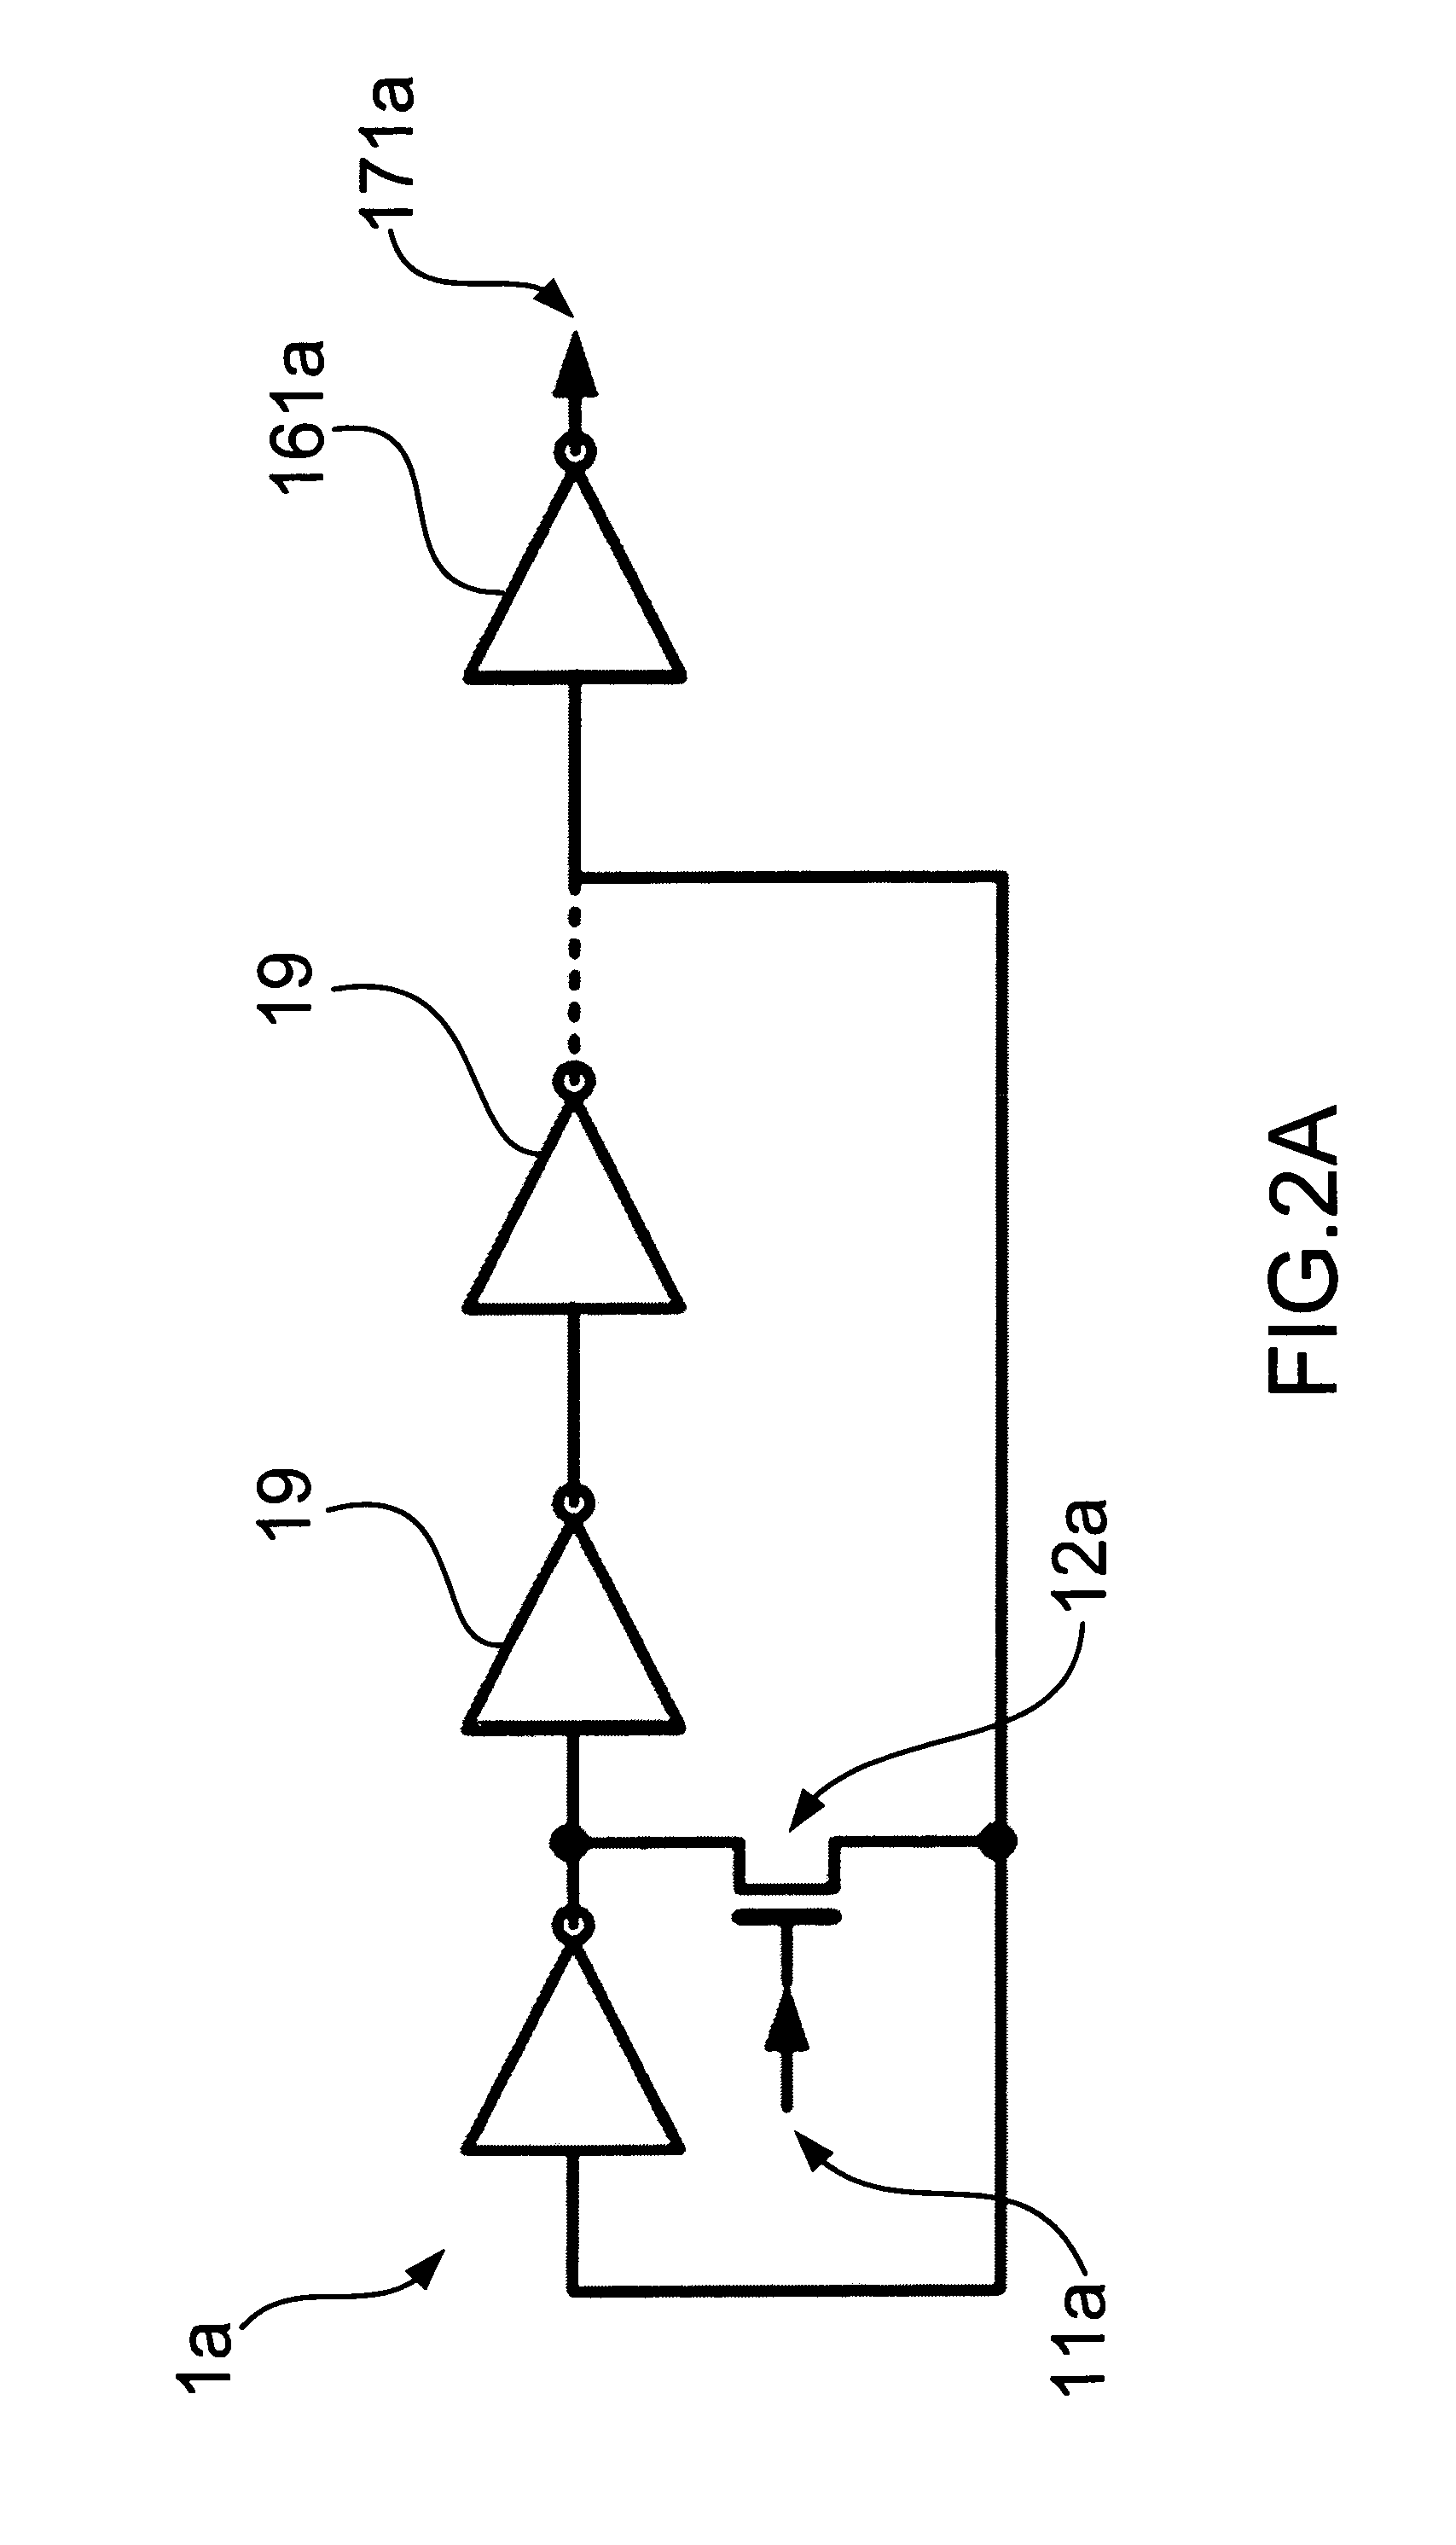 High frequency divider with input-sensitivity compensation